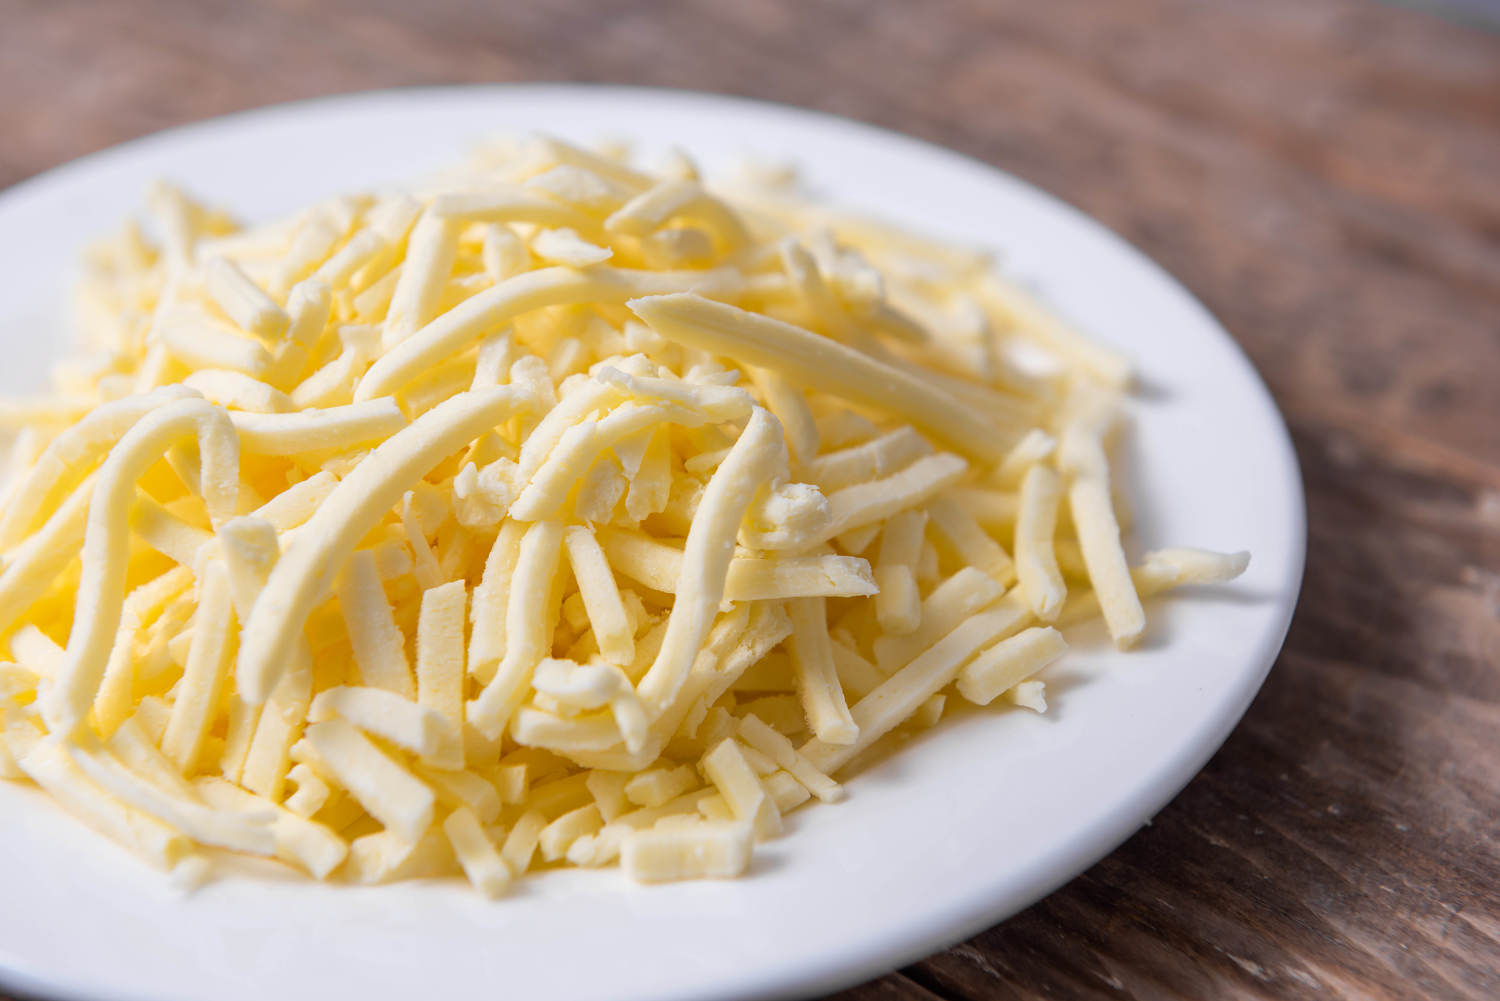 Shredded cheese recalled over listeria concerns impacts foodmaker Sargento